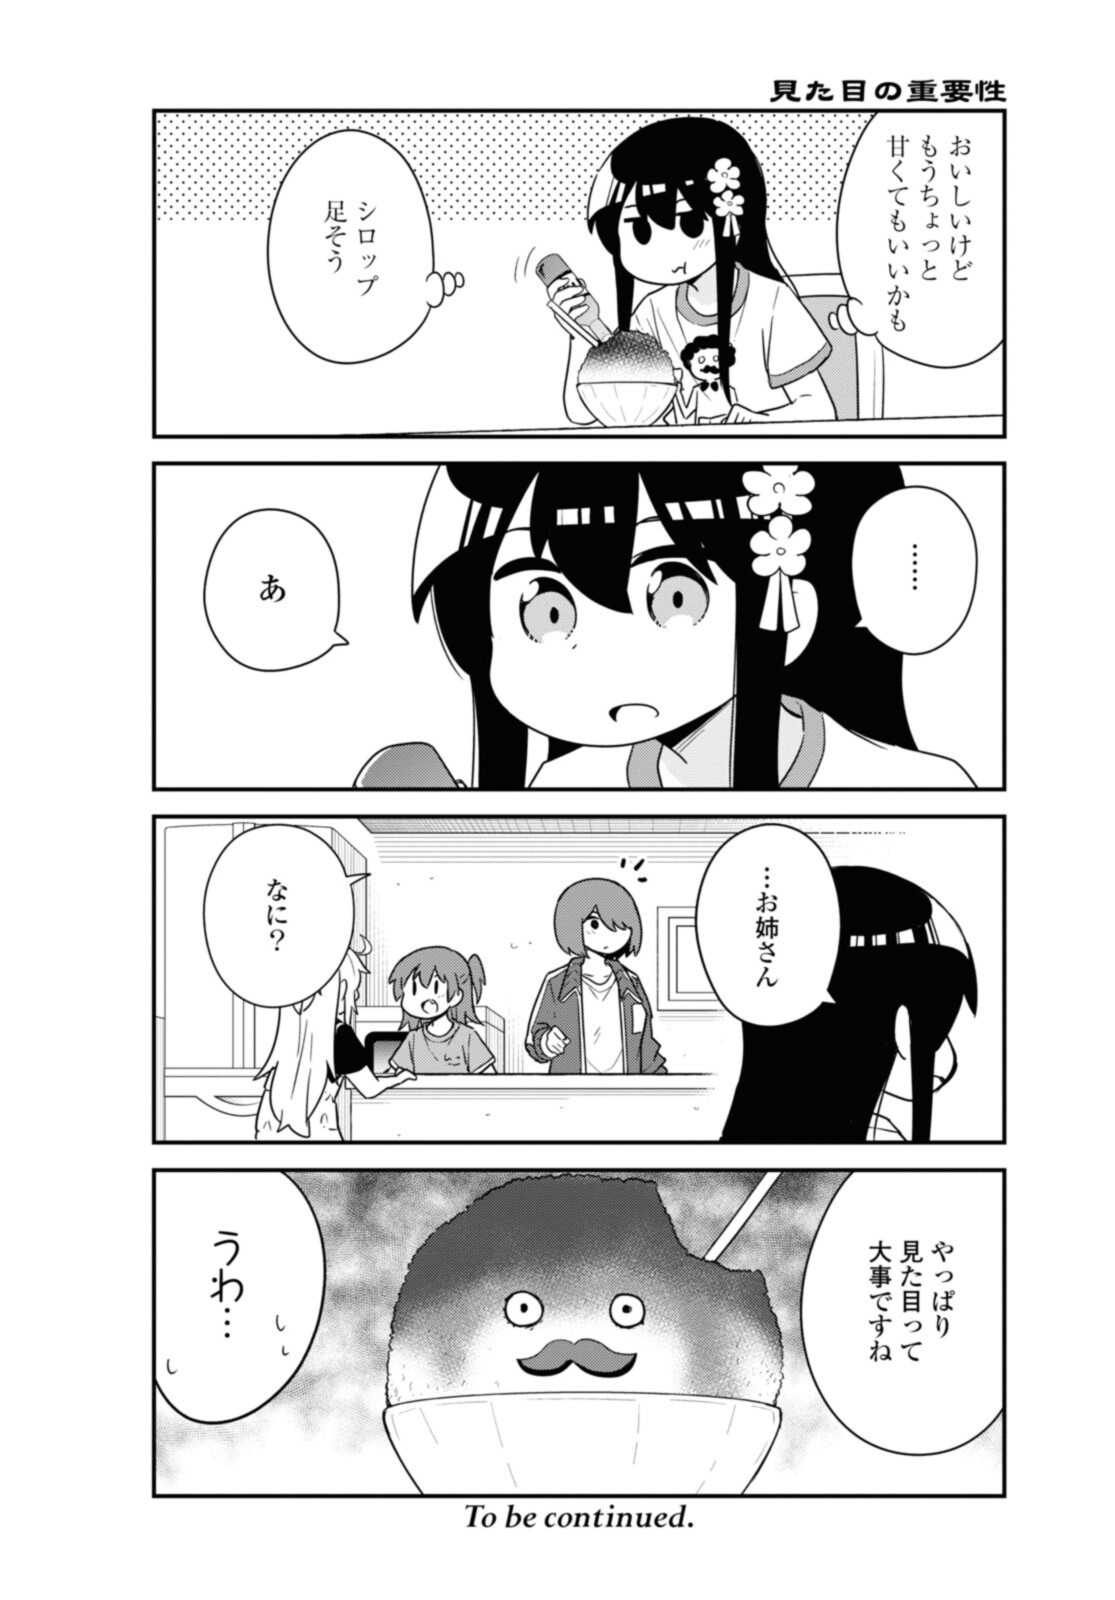 Wataten! An Angel Flew Down to Me 私に天使が舞い降りた！ 第88話 - Page 11